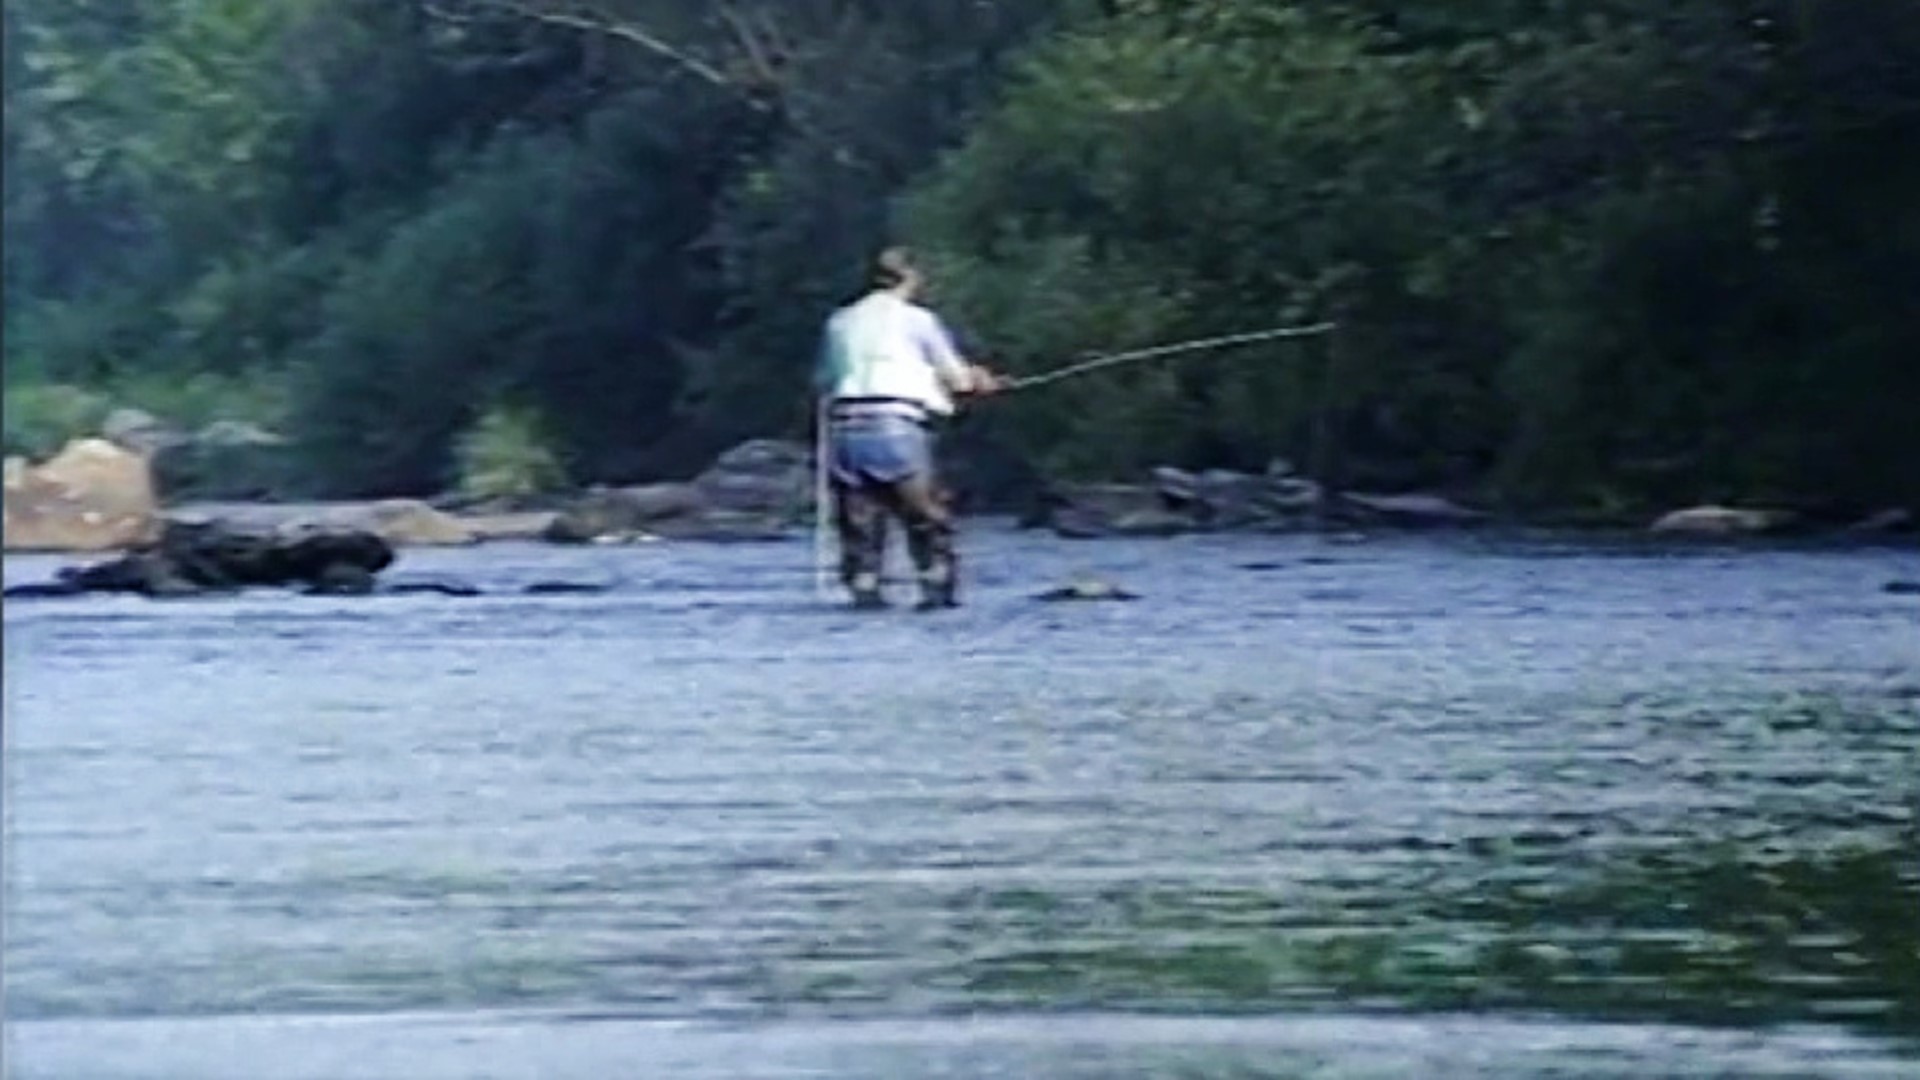 Wet a line with Mike as he shares his thoughts on the first day of trout season from 30 years ago.